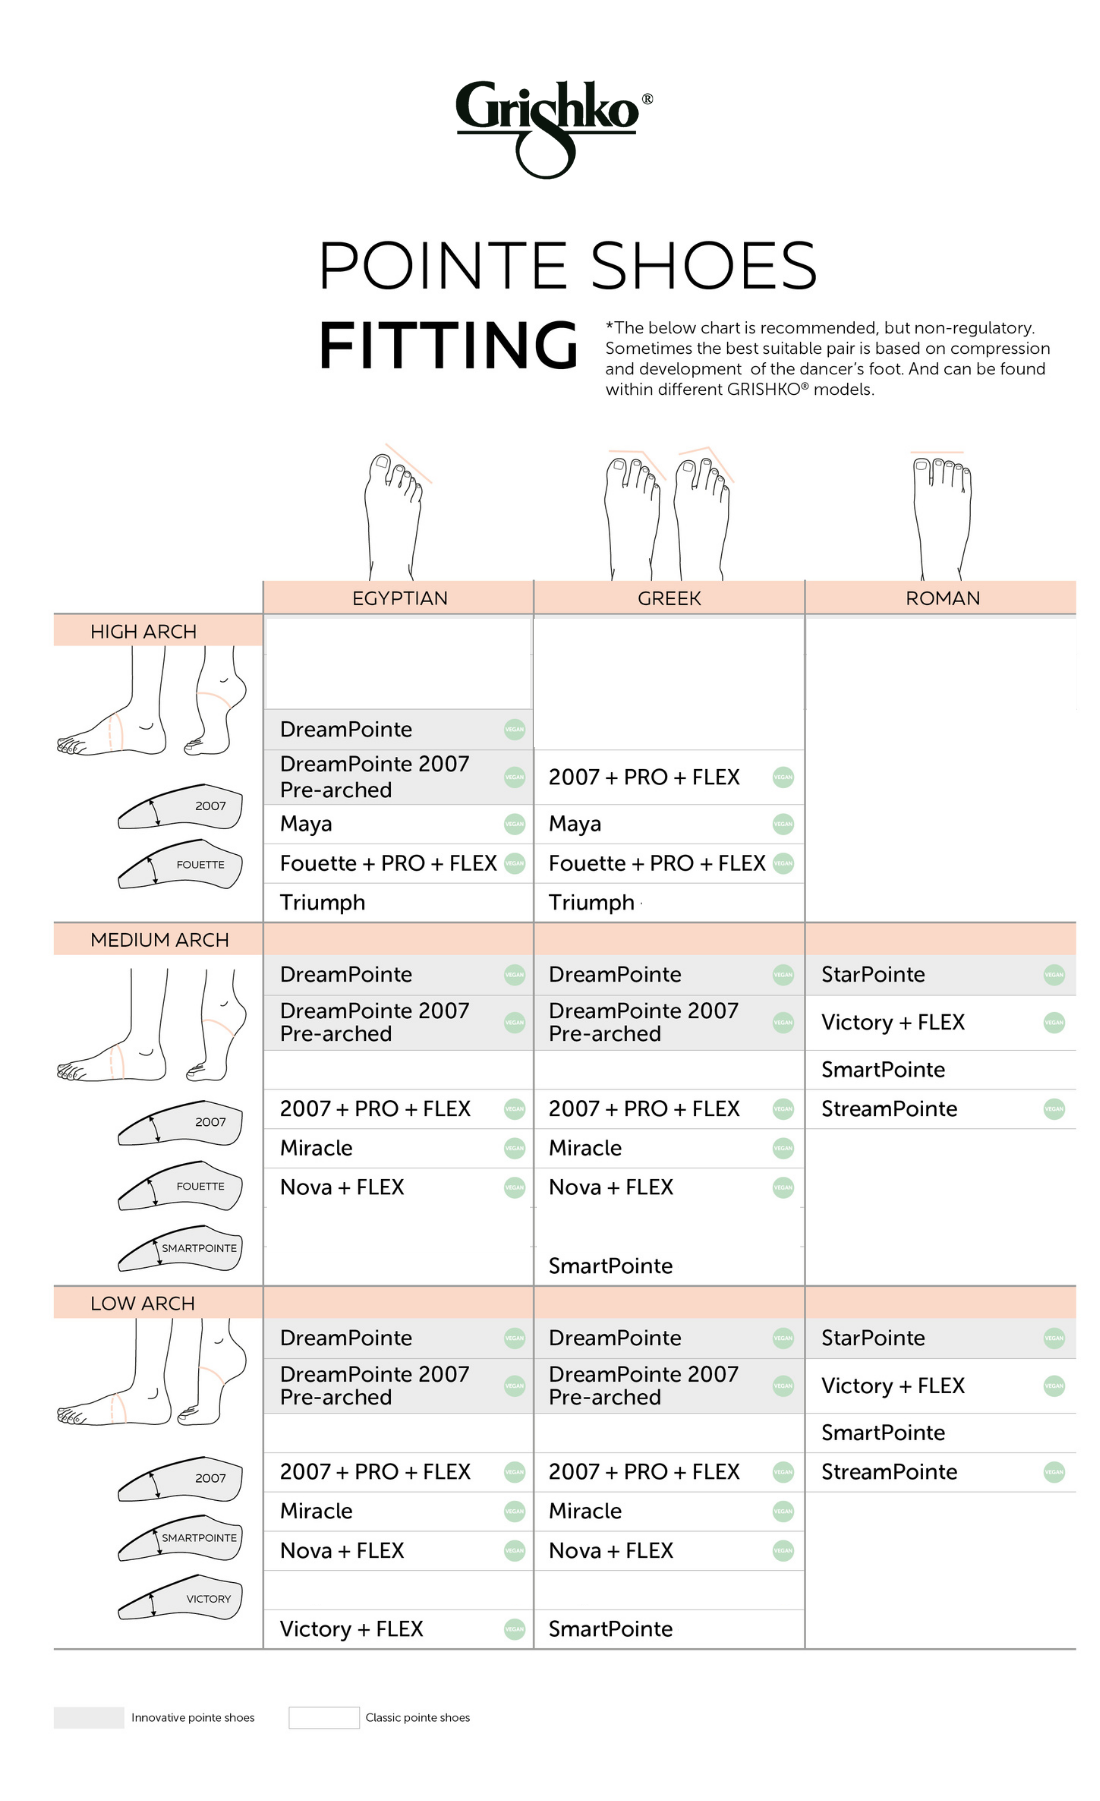 Pointe Shoes - Fitting